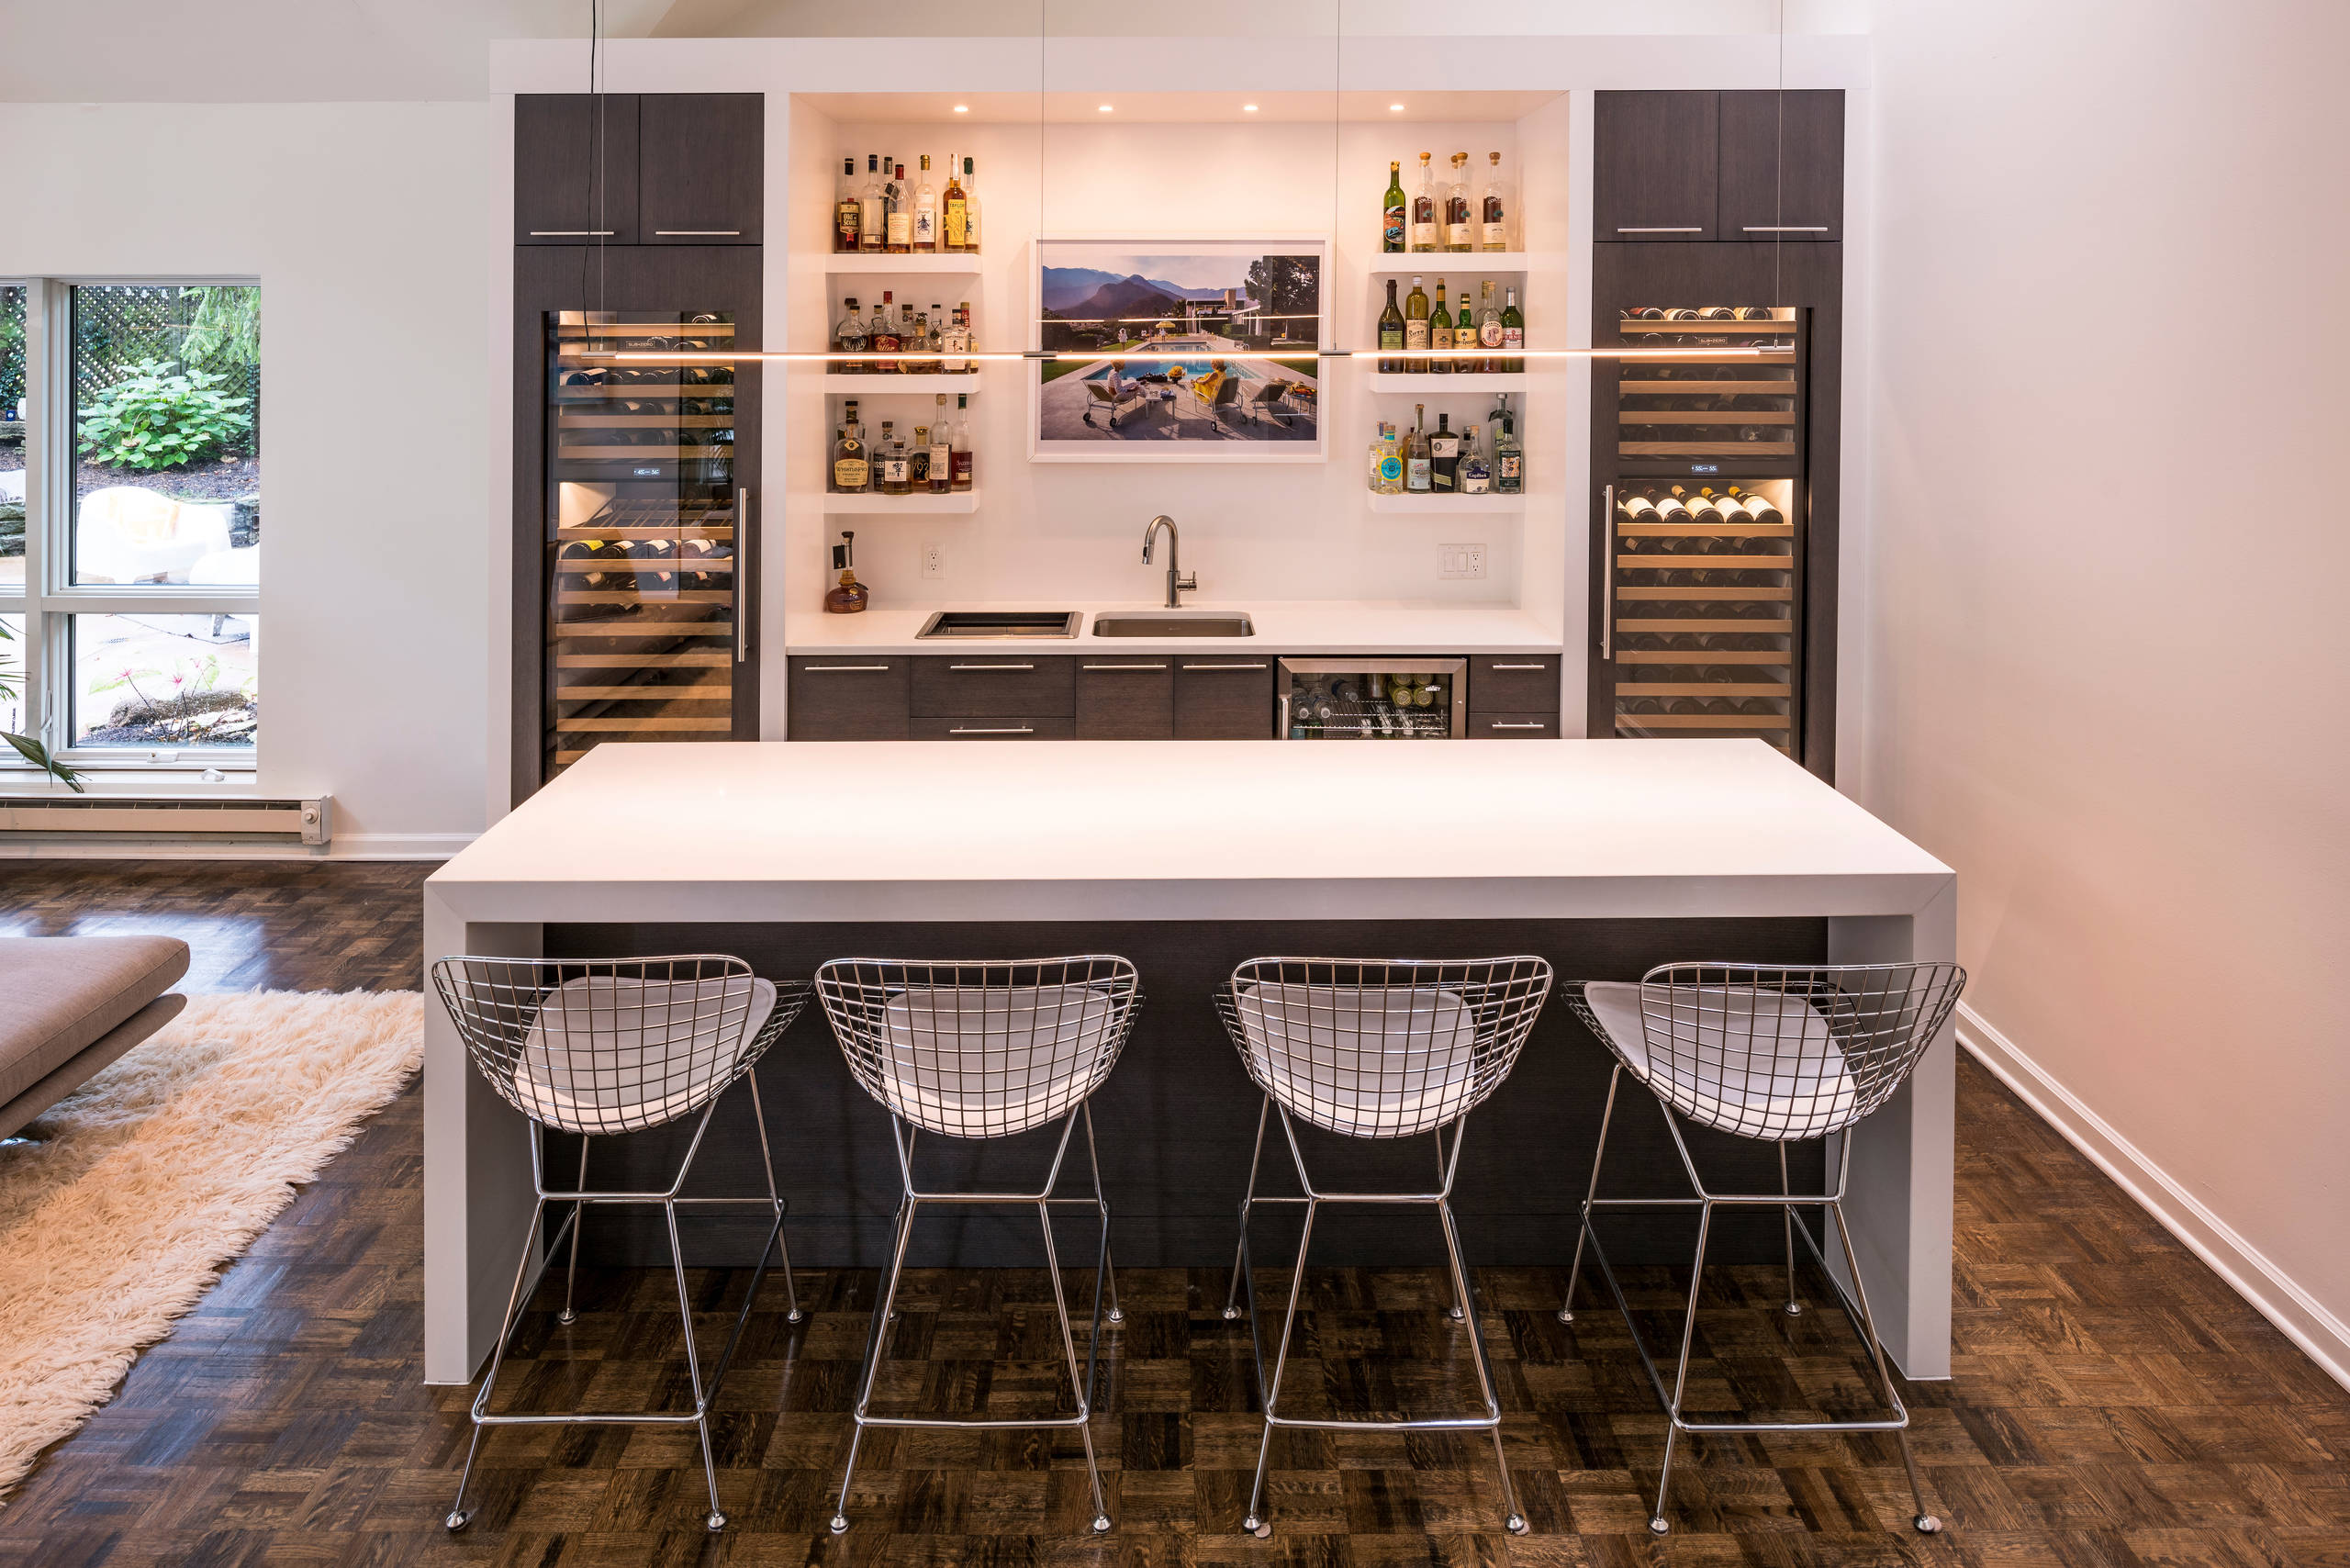 Sommelier's Choice by Don Justice Cabinet Makers